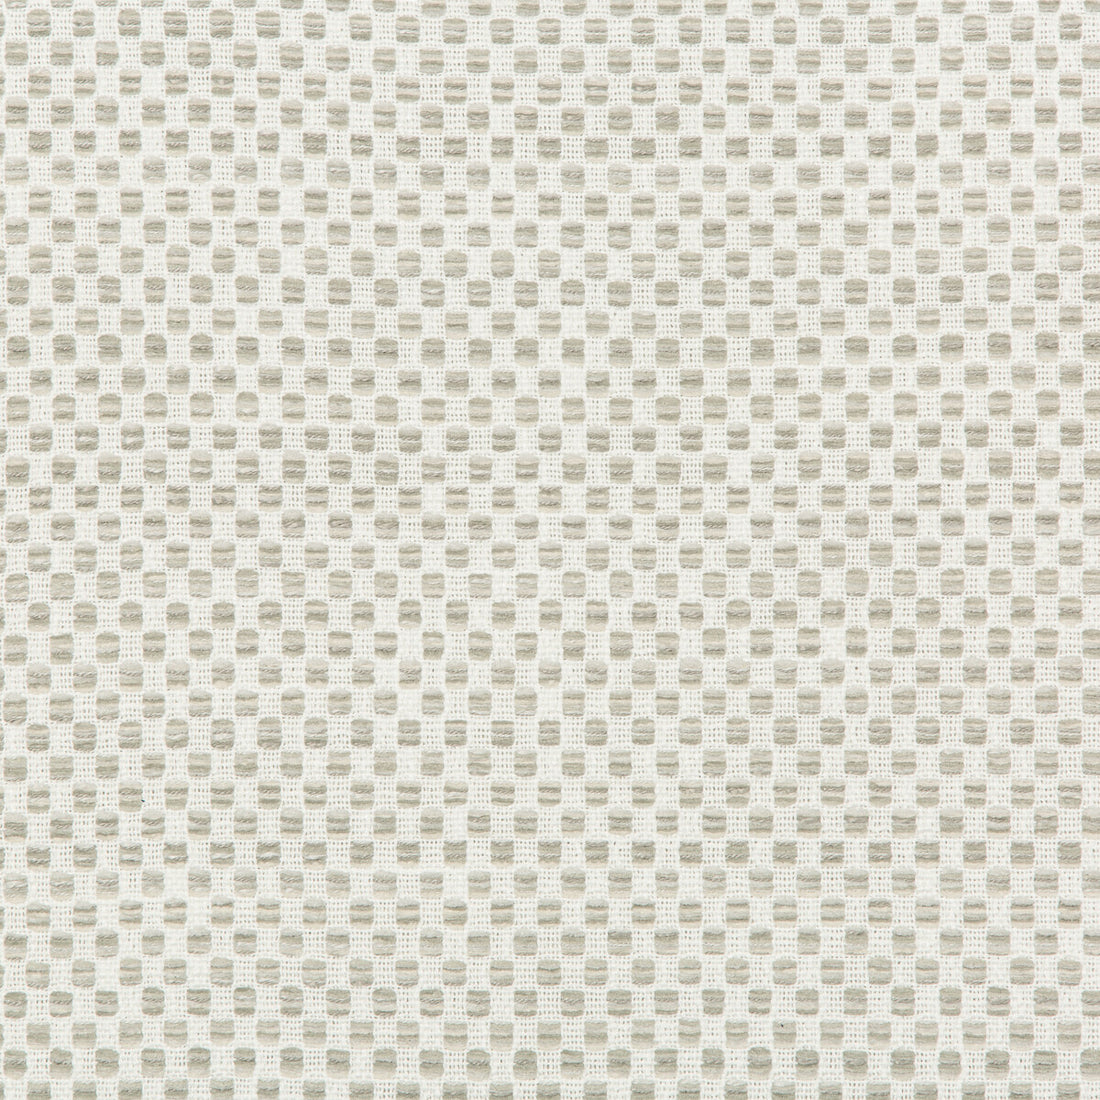 Kravet Design fabric in 36090-11 color - pattern 36090.11.0 - by Kravet Design in the Inside Out Performance Fabrics collection